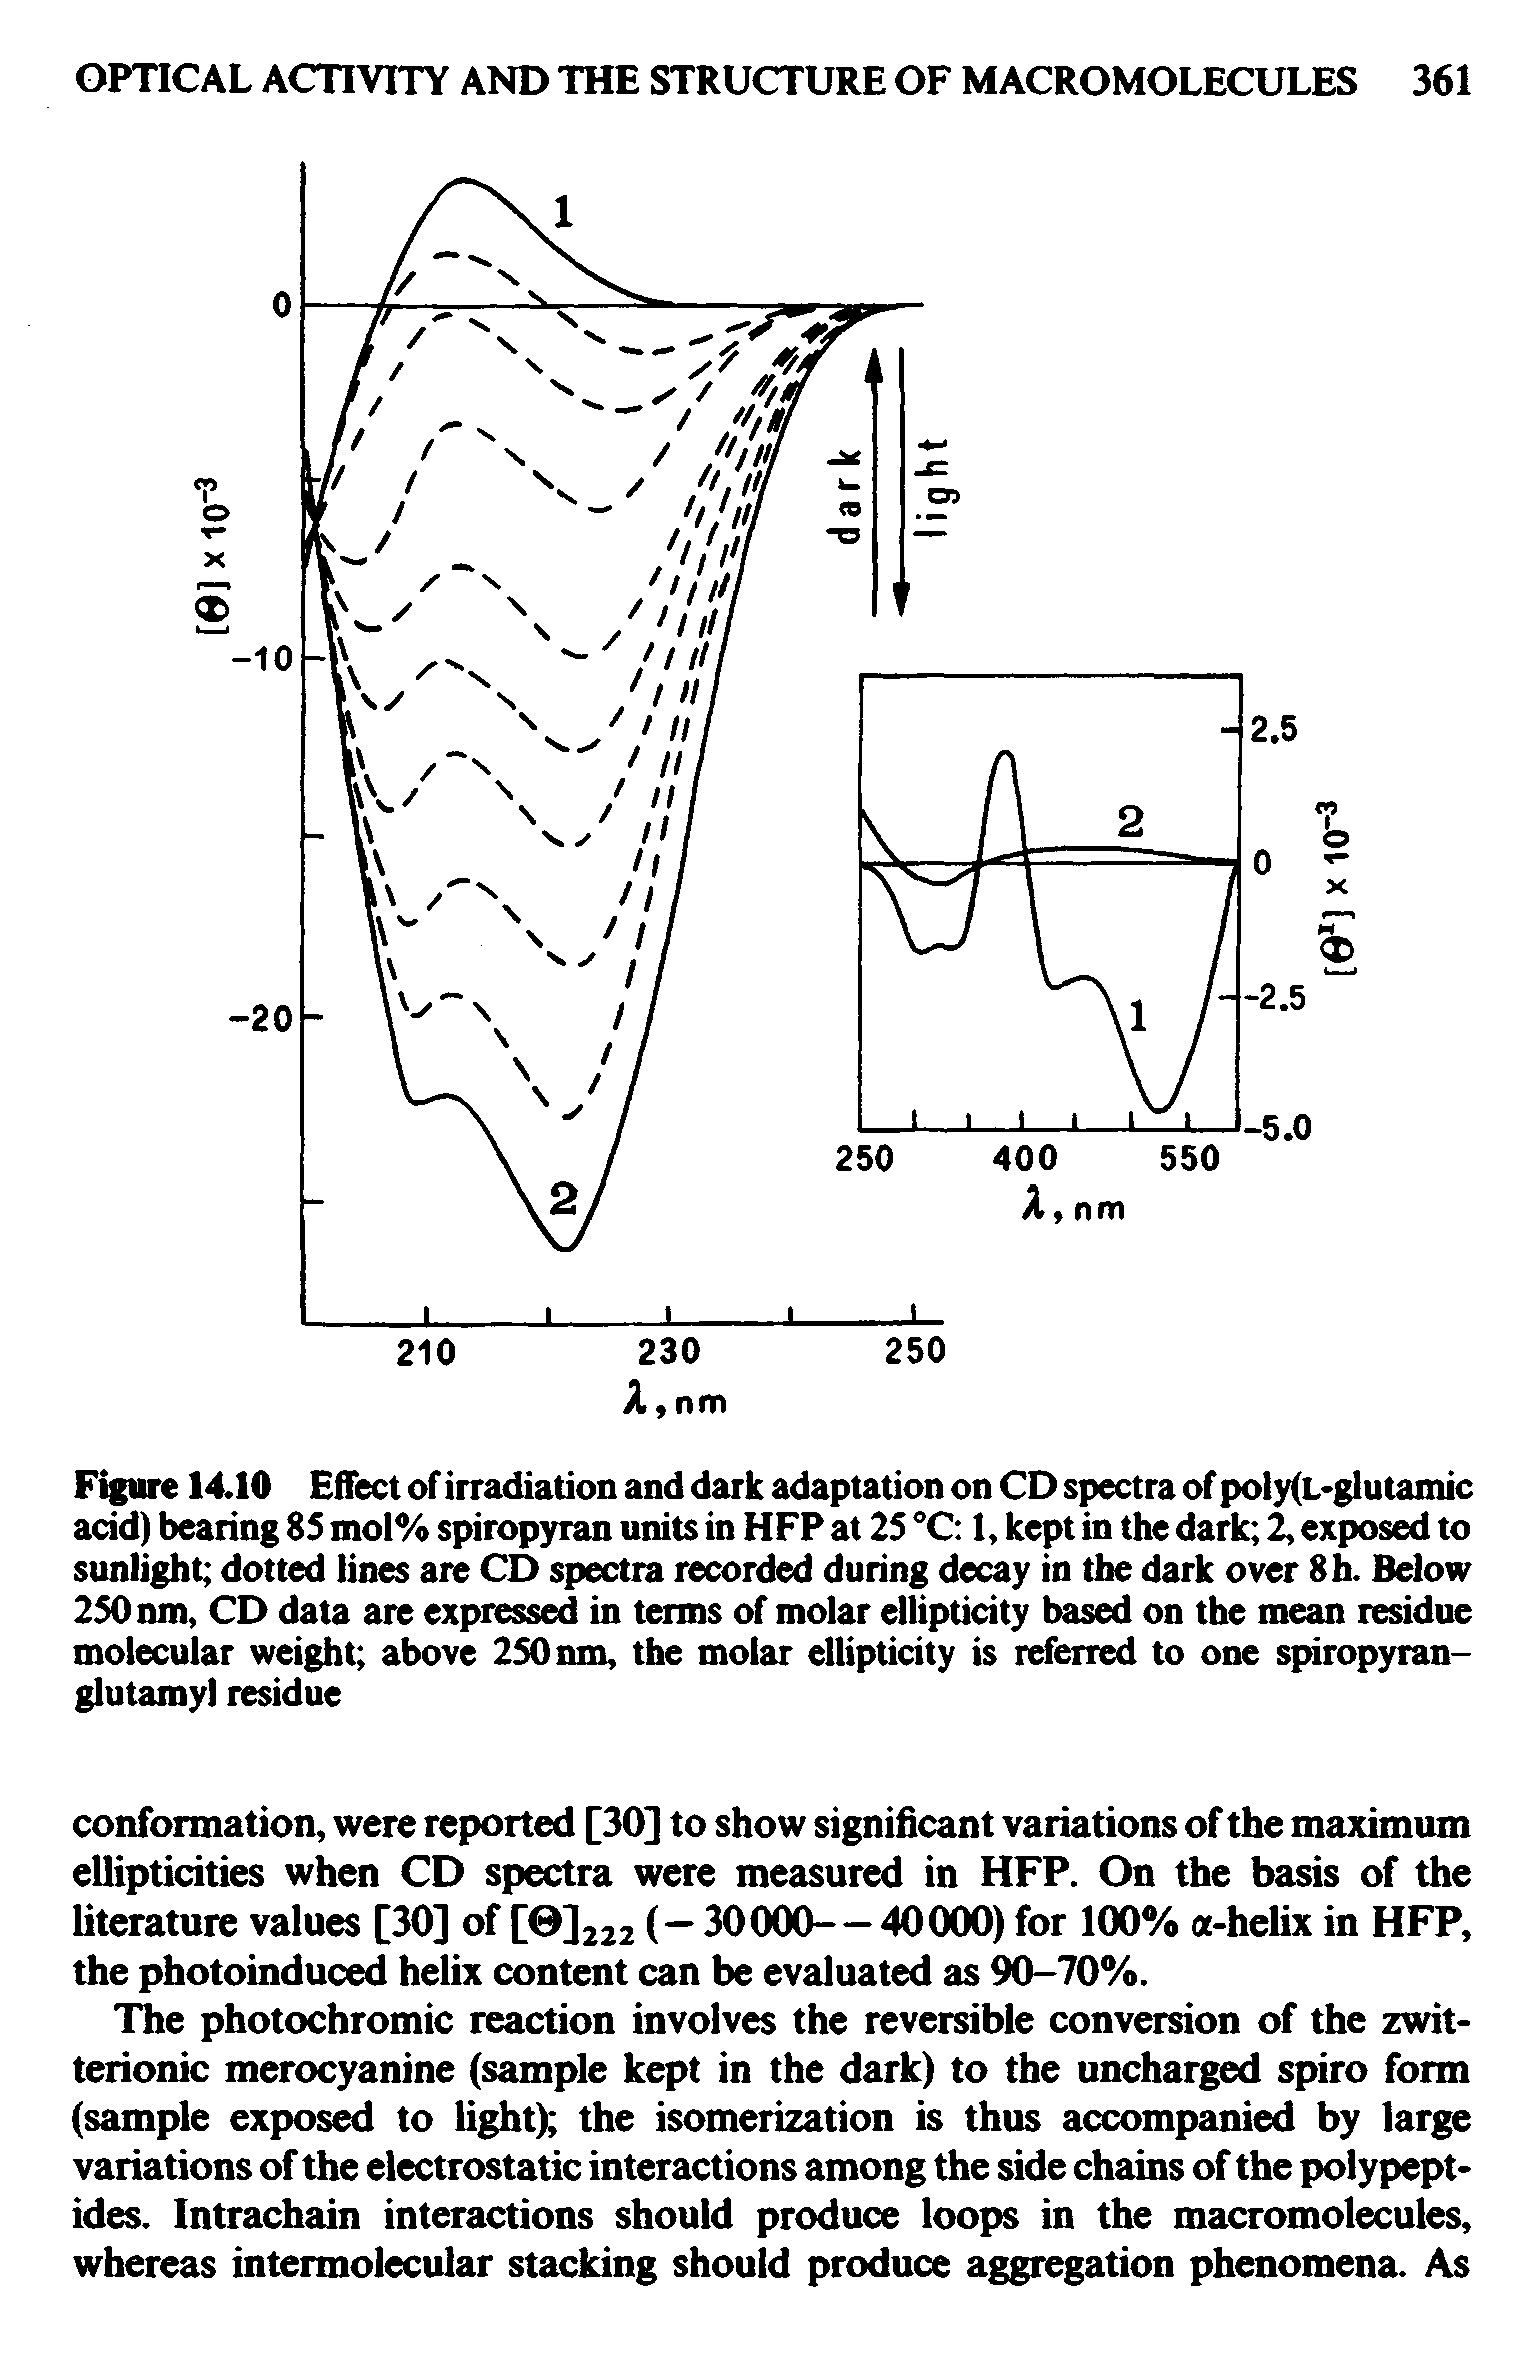 Figure 14.10 Effect of irradiation and dark adaptation on CD spectra of poly(L glutainic acid) bearing 85 mol% spiropyran units in HFP at 25 °C 1, kept in the dark 2, exposed to sunlight dotted lines are CD spectra recorded during decay in the dark over 8h. Below 250nm, CD data are expressed in terms of molar ellipticity based on the mean residue molecular weight above 250 nm, the molar ellipticity is referred to one sfriropyran-glutamy) residue...